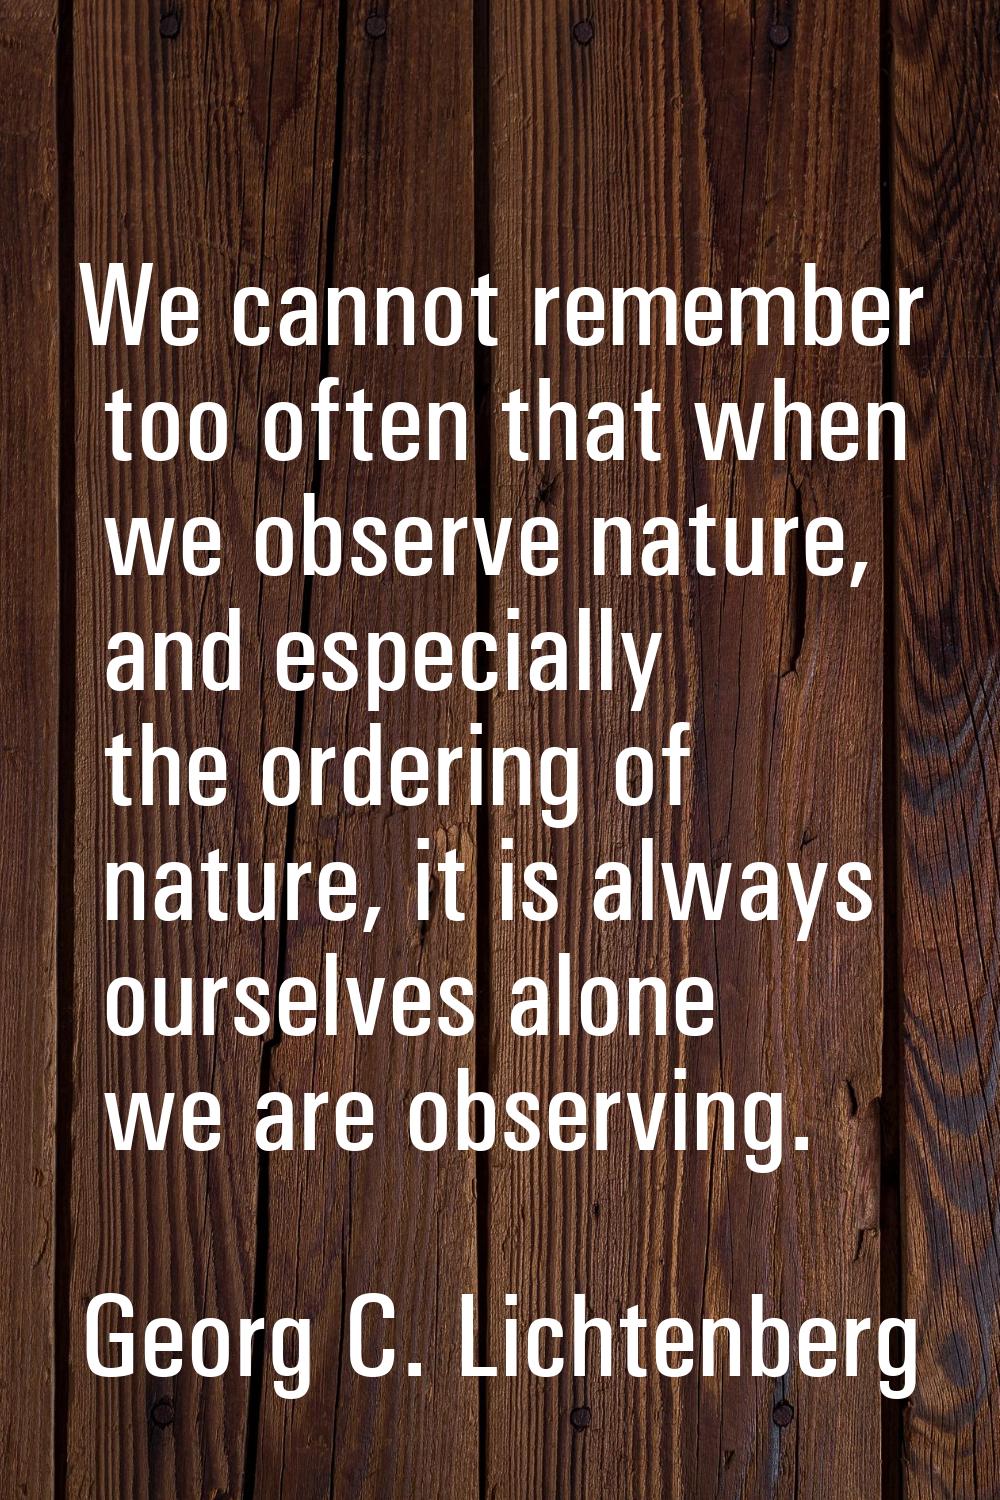 We cannot remember too often that when we observe nature, and especially the ordering of nature, it